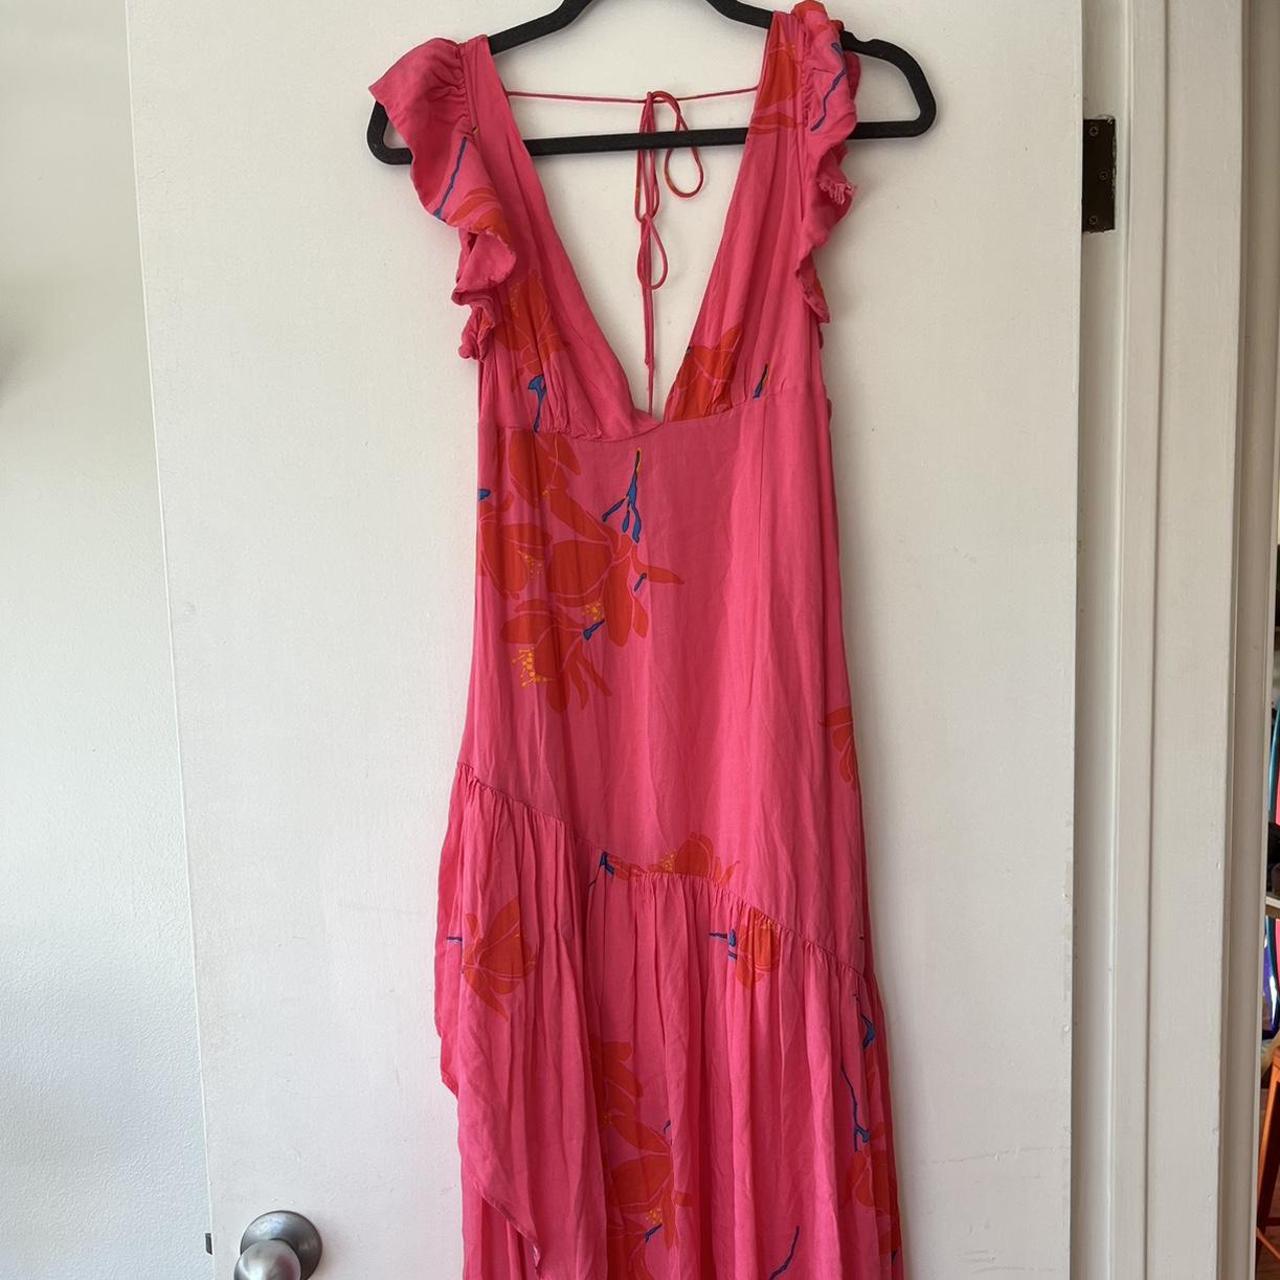 Free People She’s a Waterfall Maxi Dress Such a... - Depop